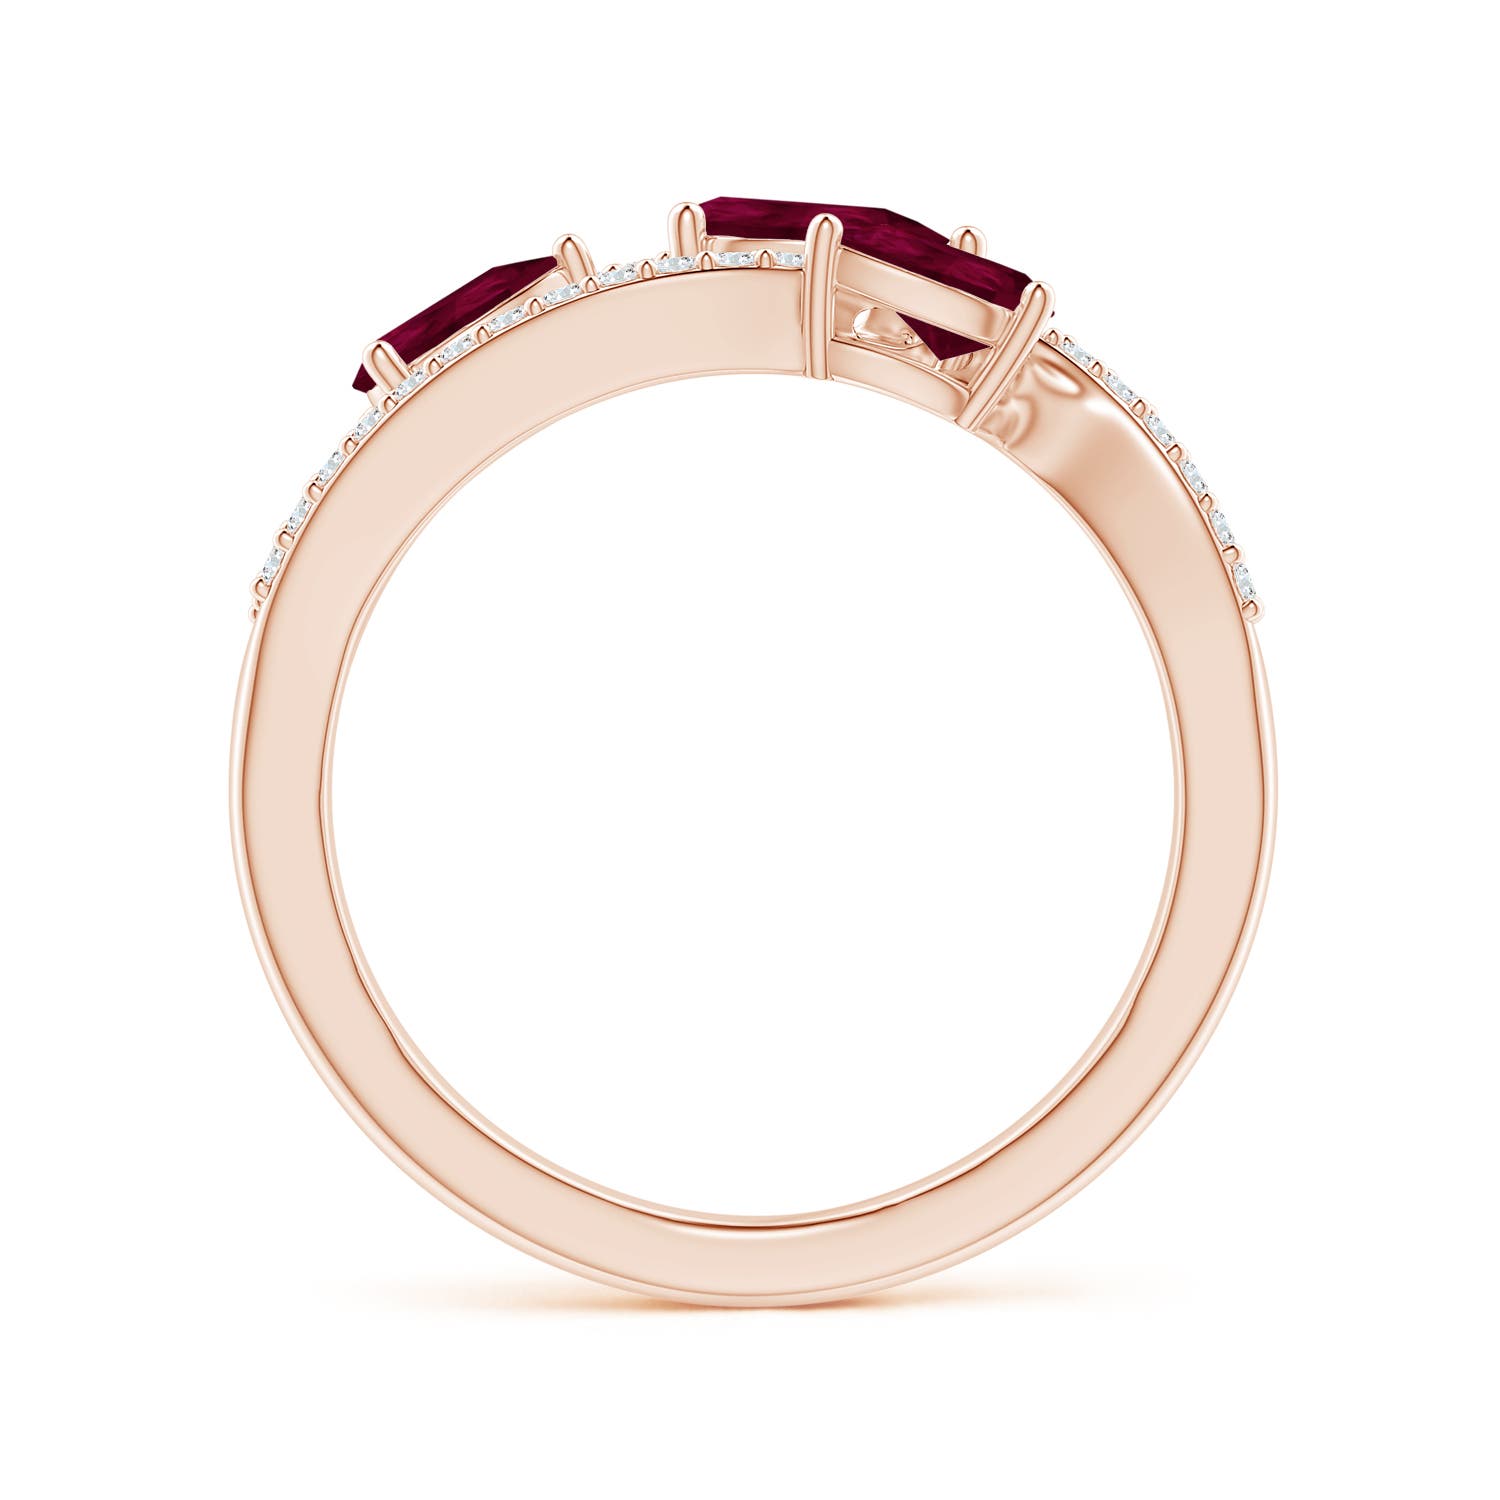 A - Ruby / 1.03 CT / 14 KT Rose Gold